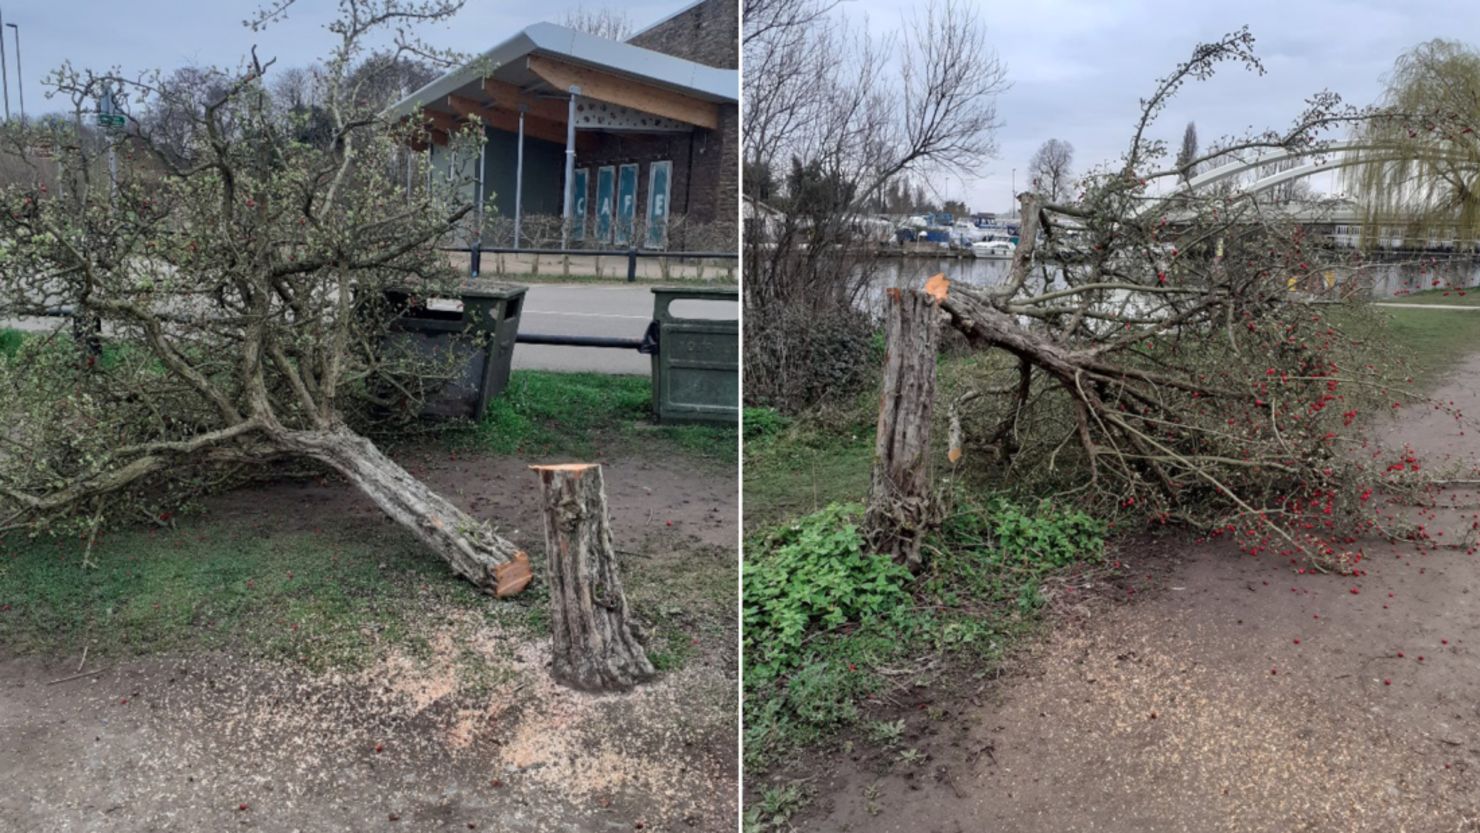 Two of the trees that have fallen victim to the phantom culprit.